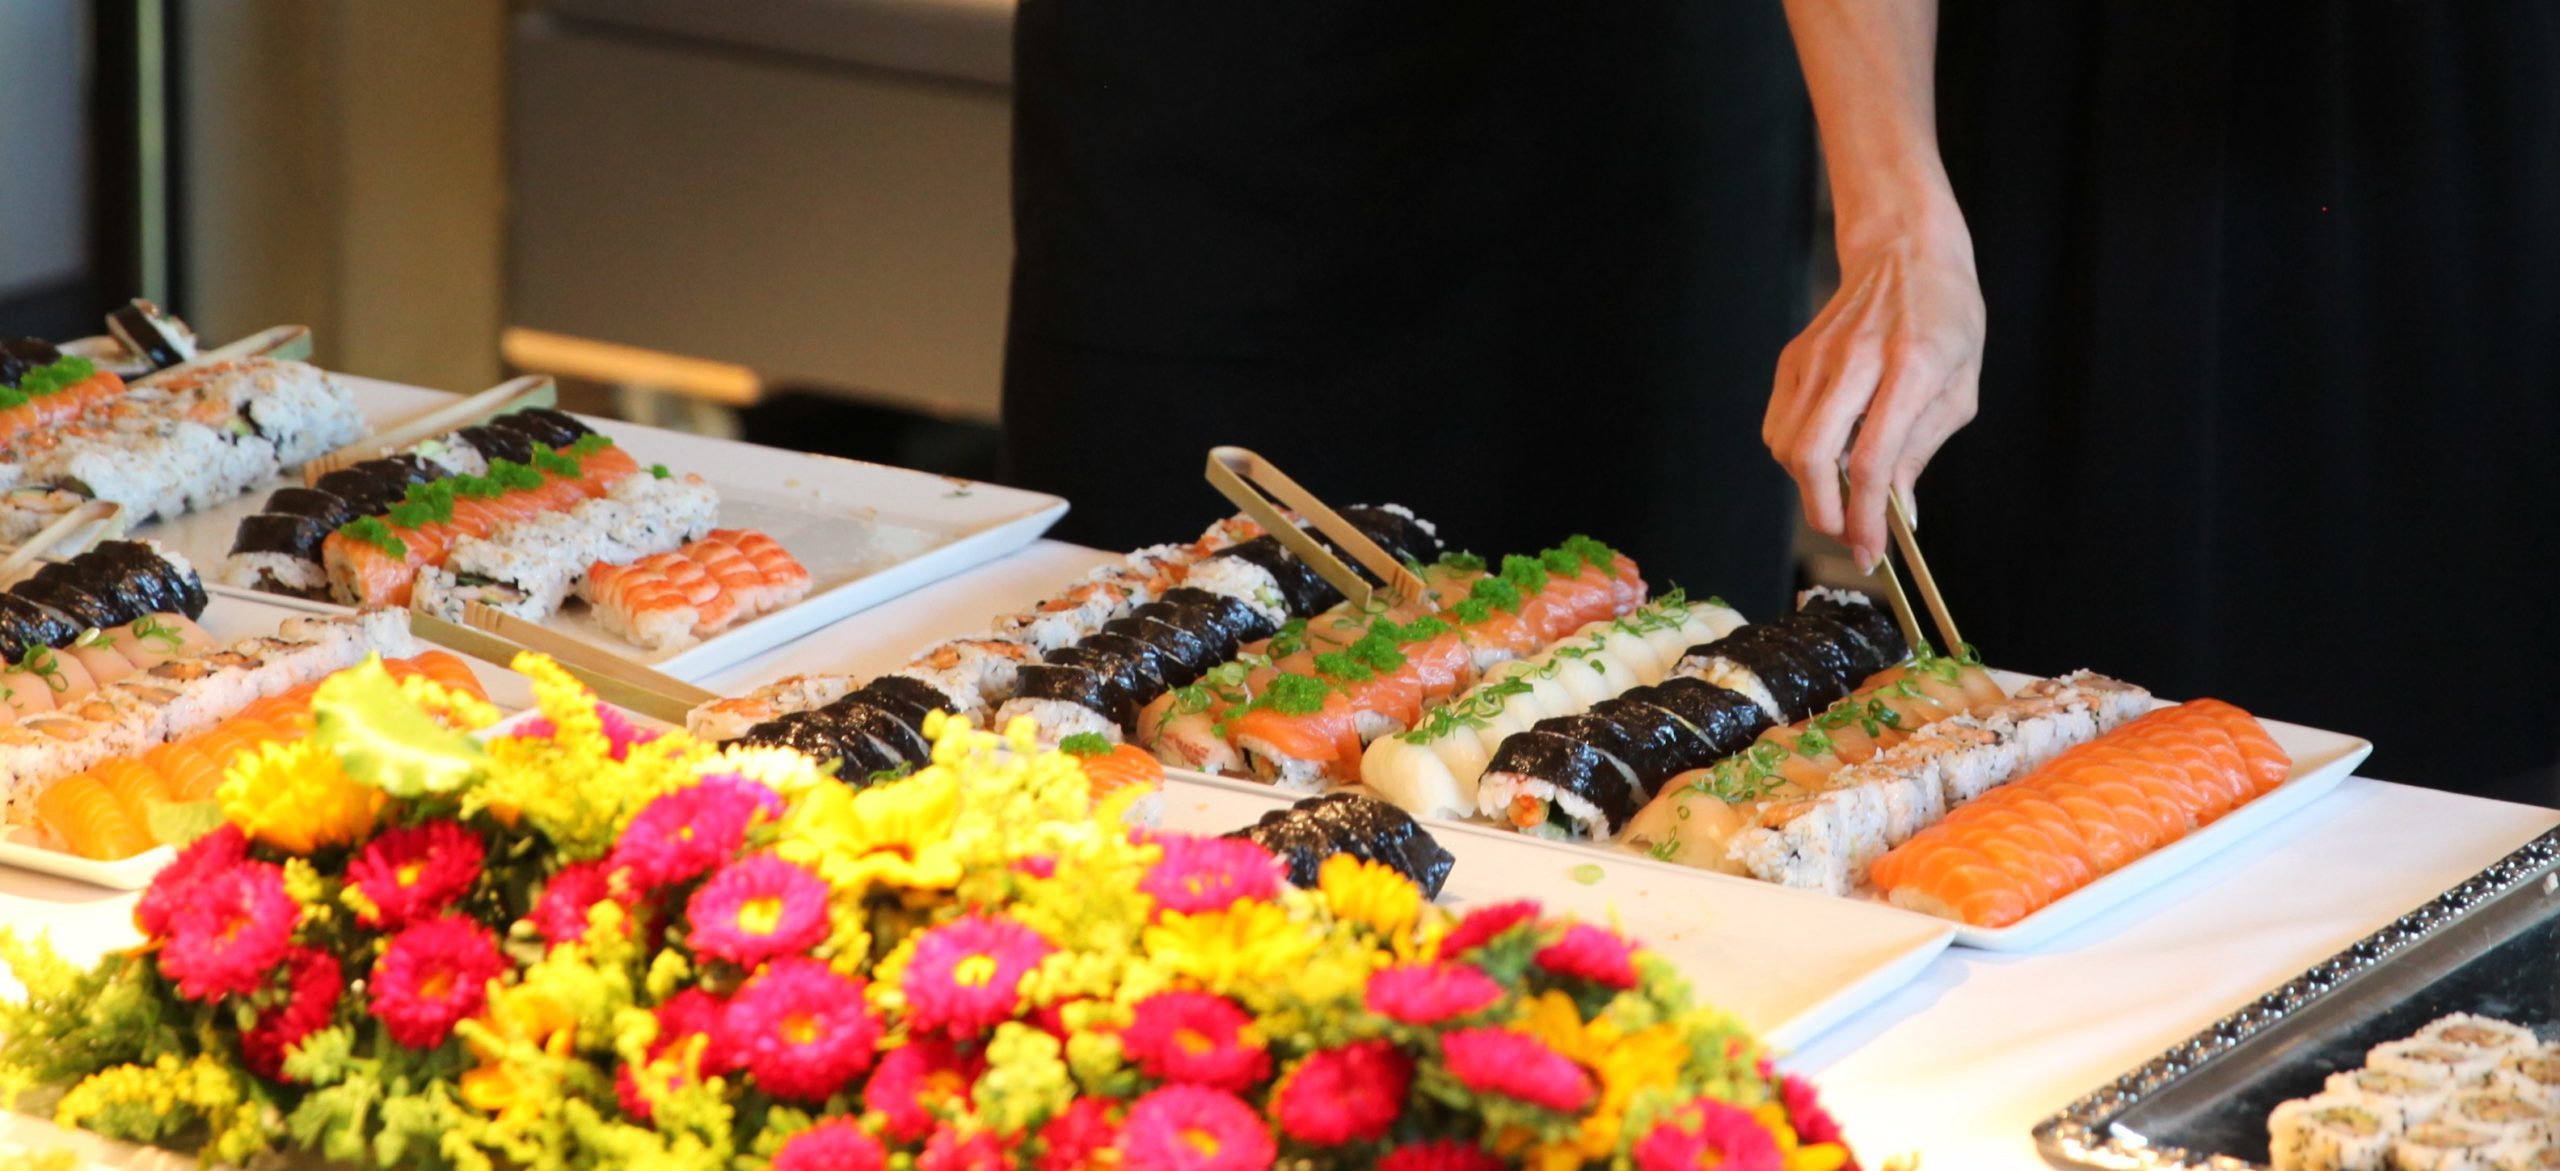 Woman helping herself to sushi at Munchmuseet in 2015. Idemitsu business reception. Photo: IPN